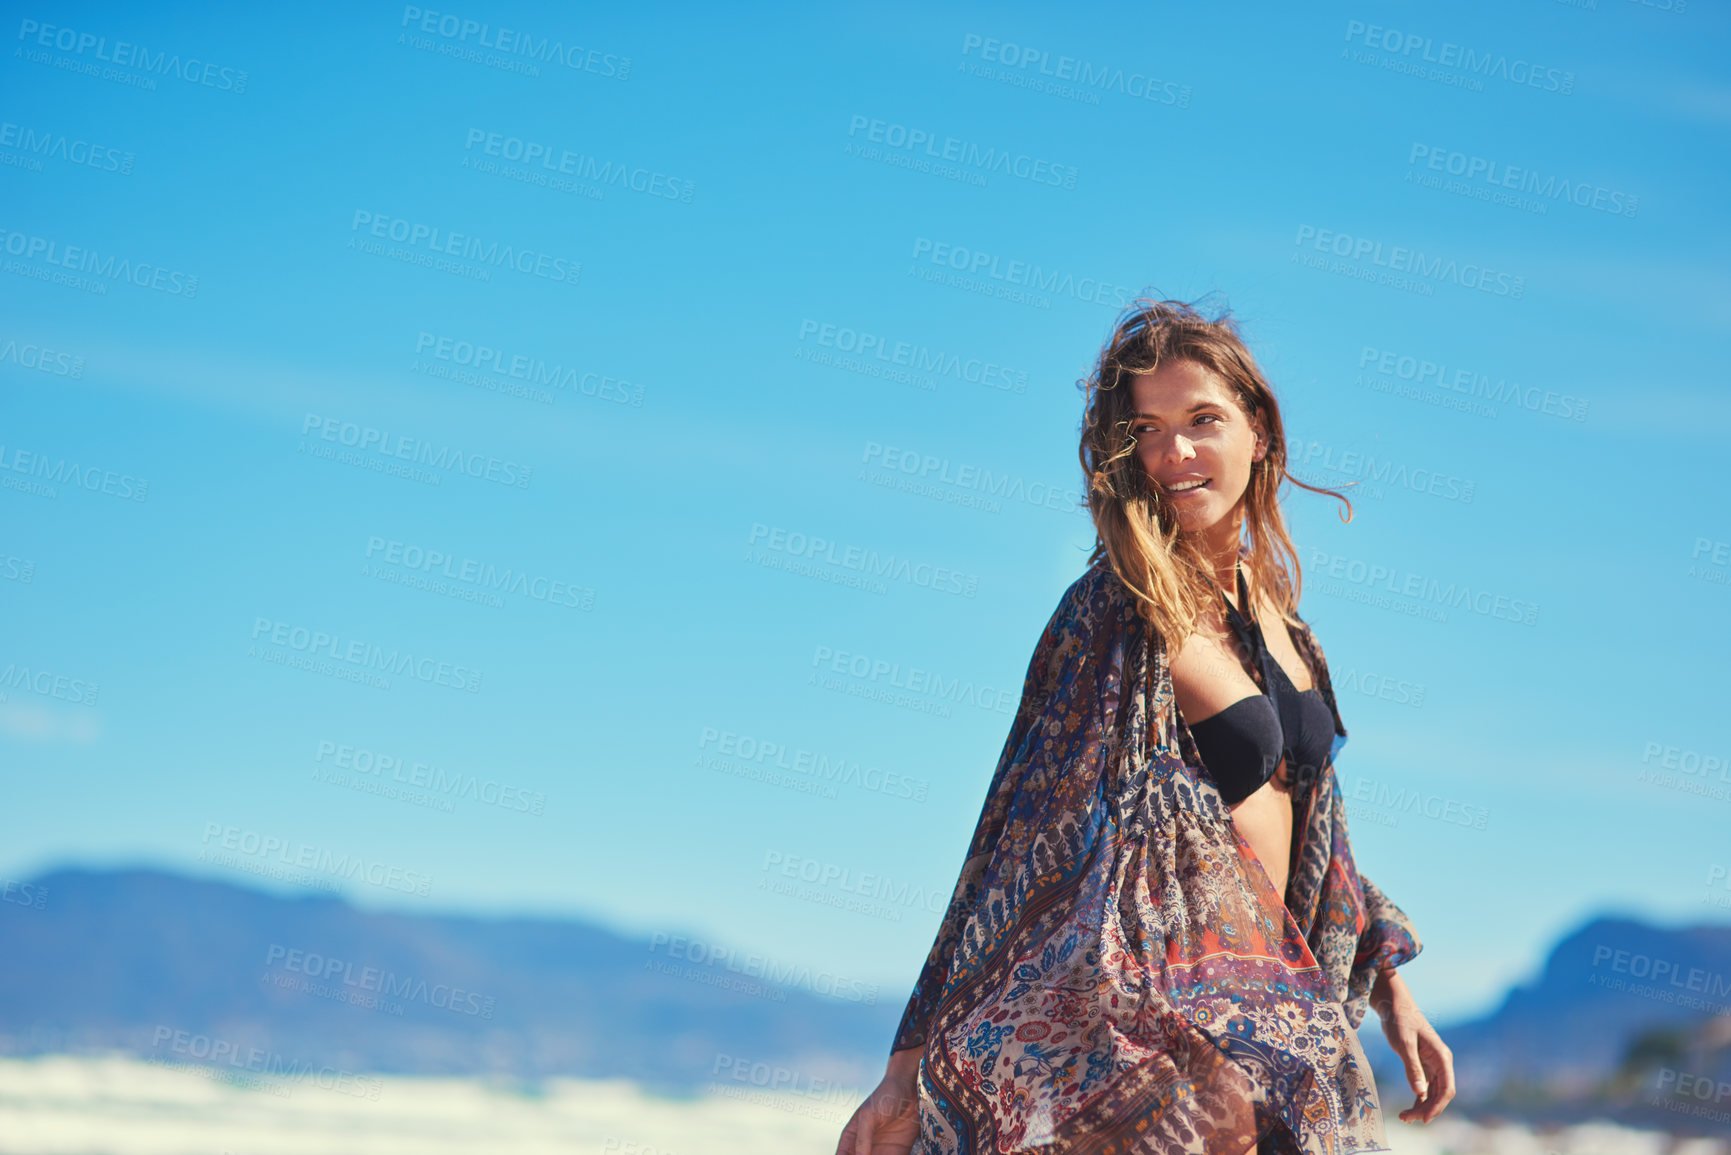 Buy stock photo Shot of a young woman enjoying a summer's day at the beach